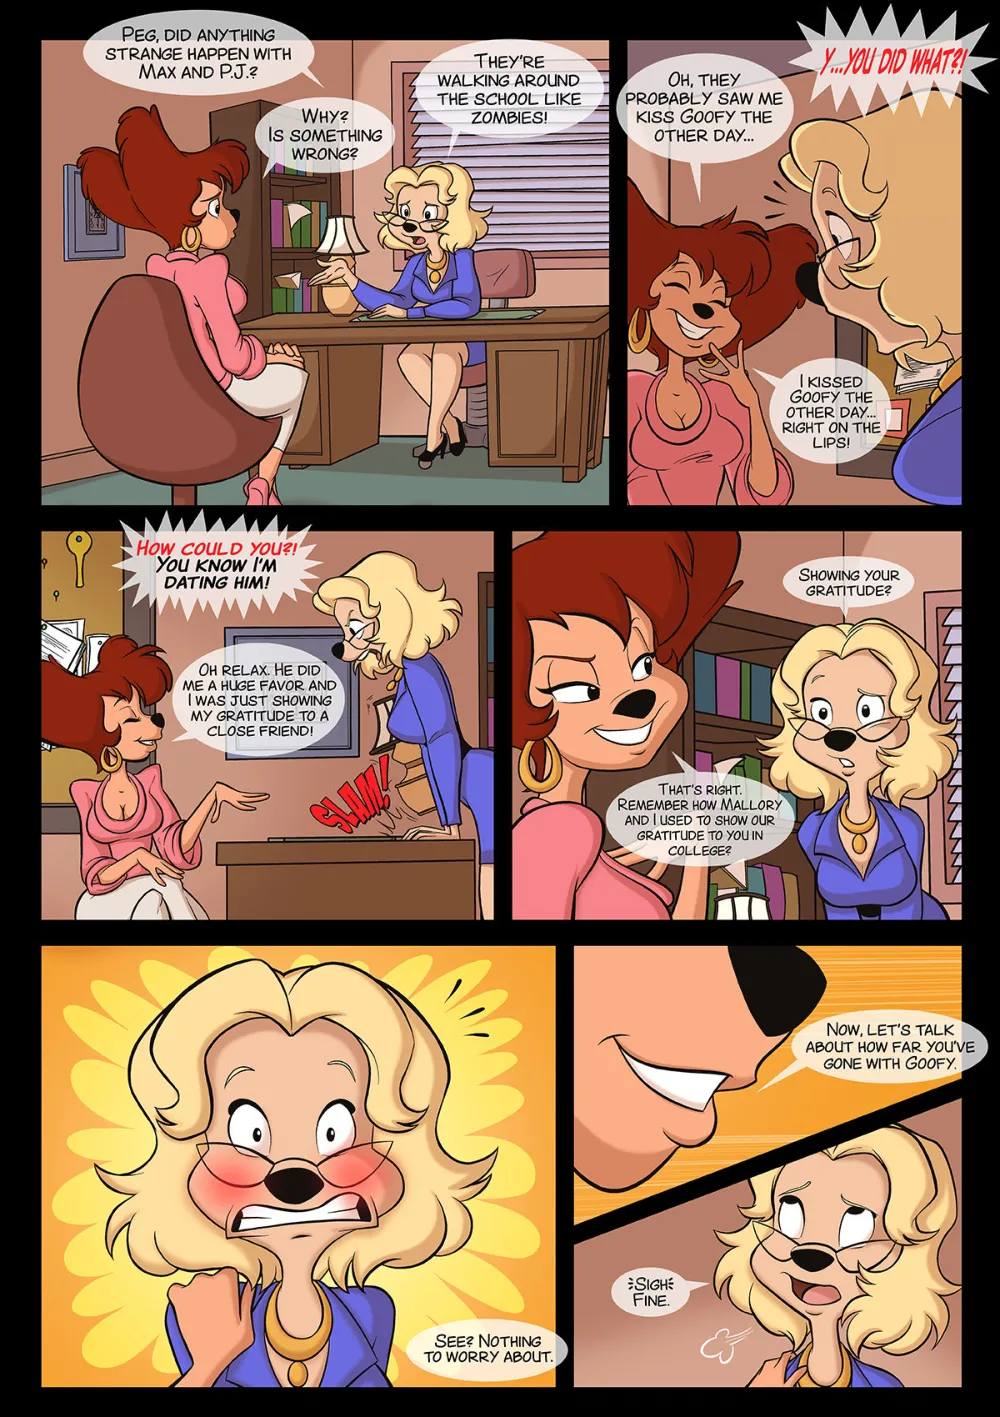 Goof Troop- She Goofed! [ThaMan] - Page 6